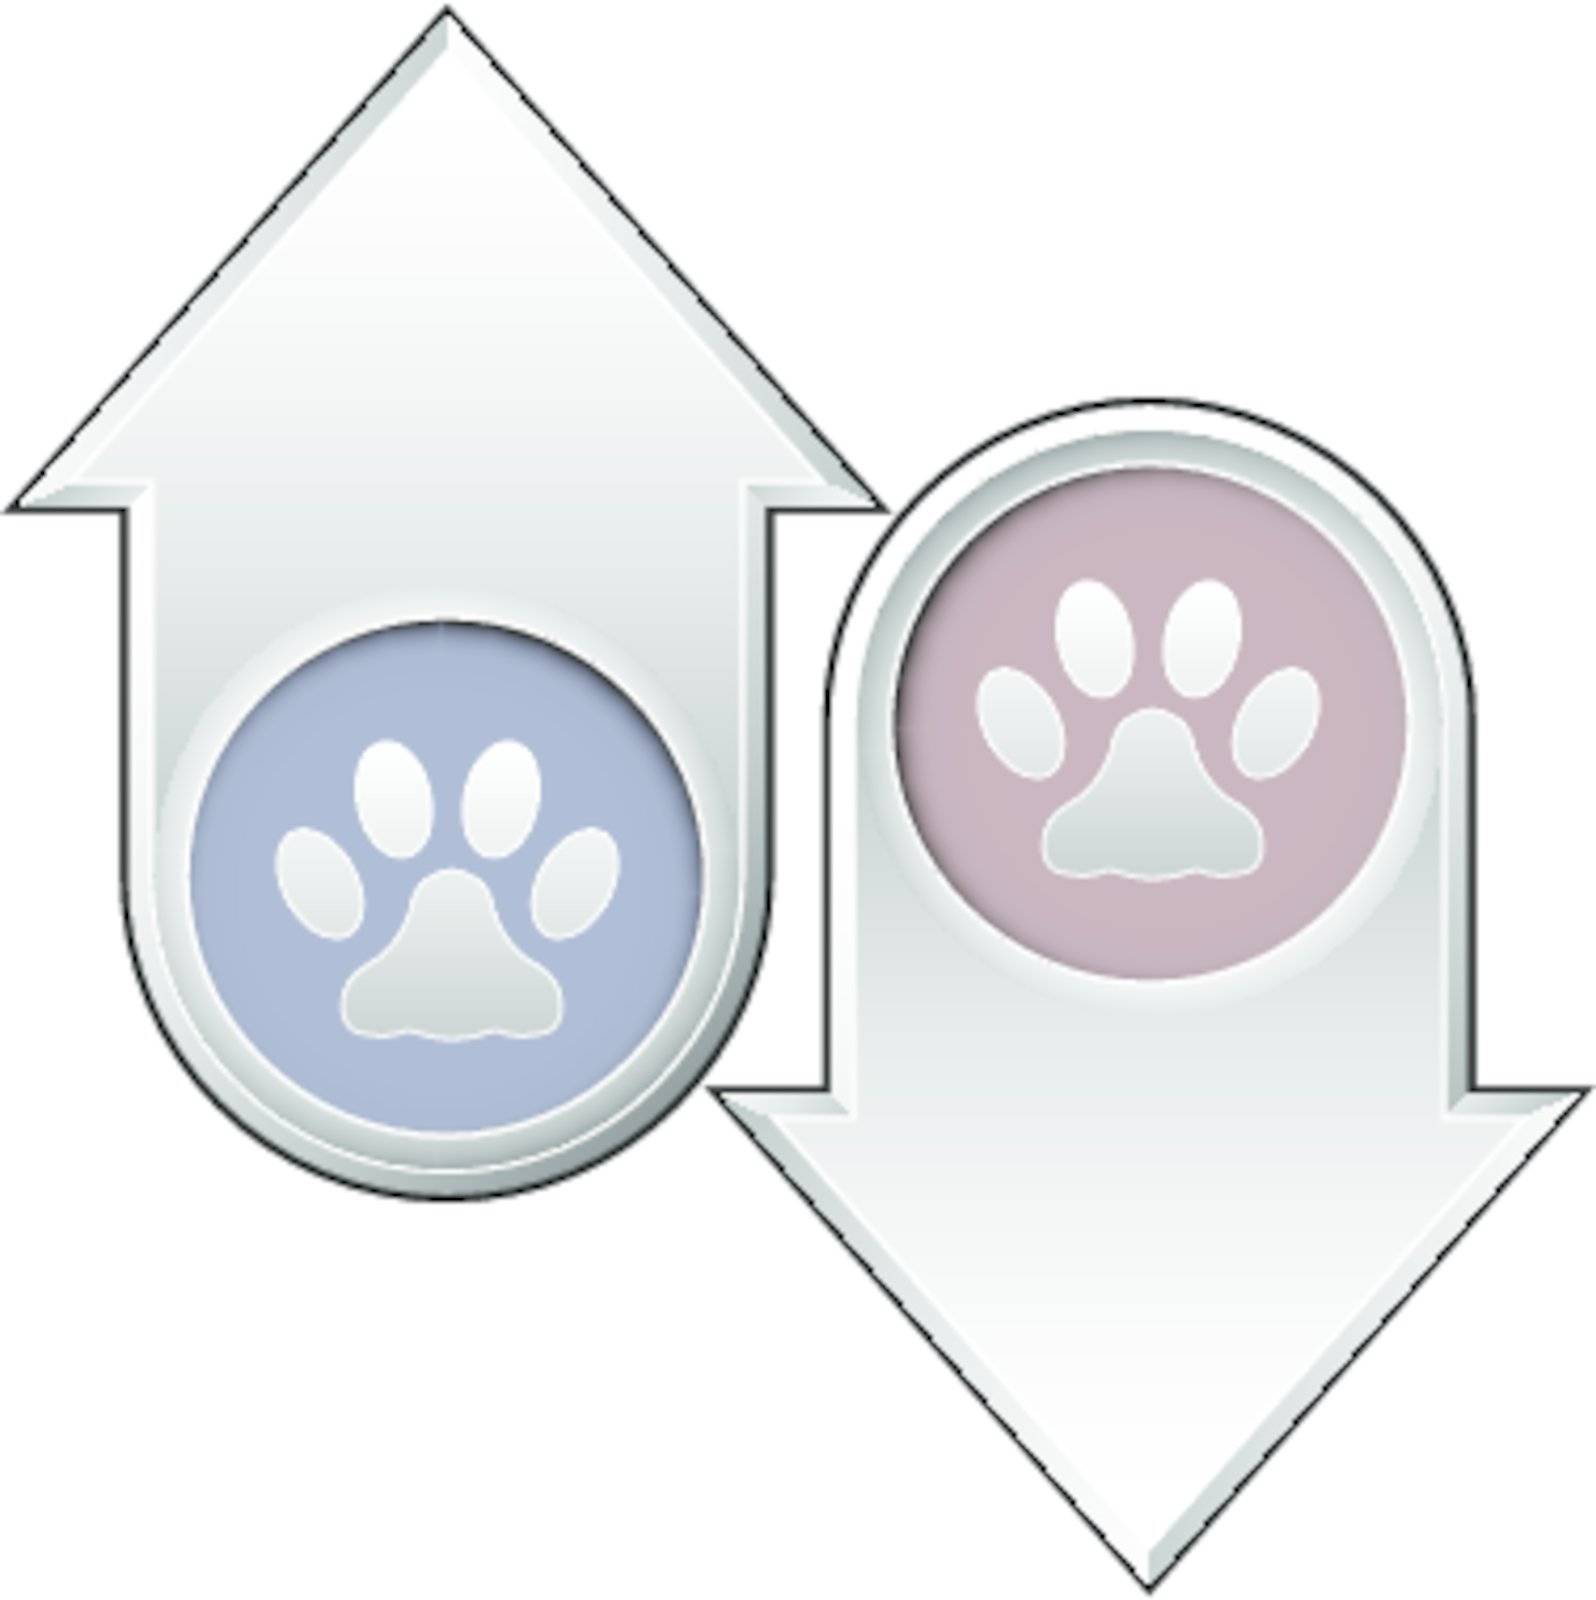 Paw print icon on up and down arrow buttons